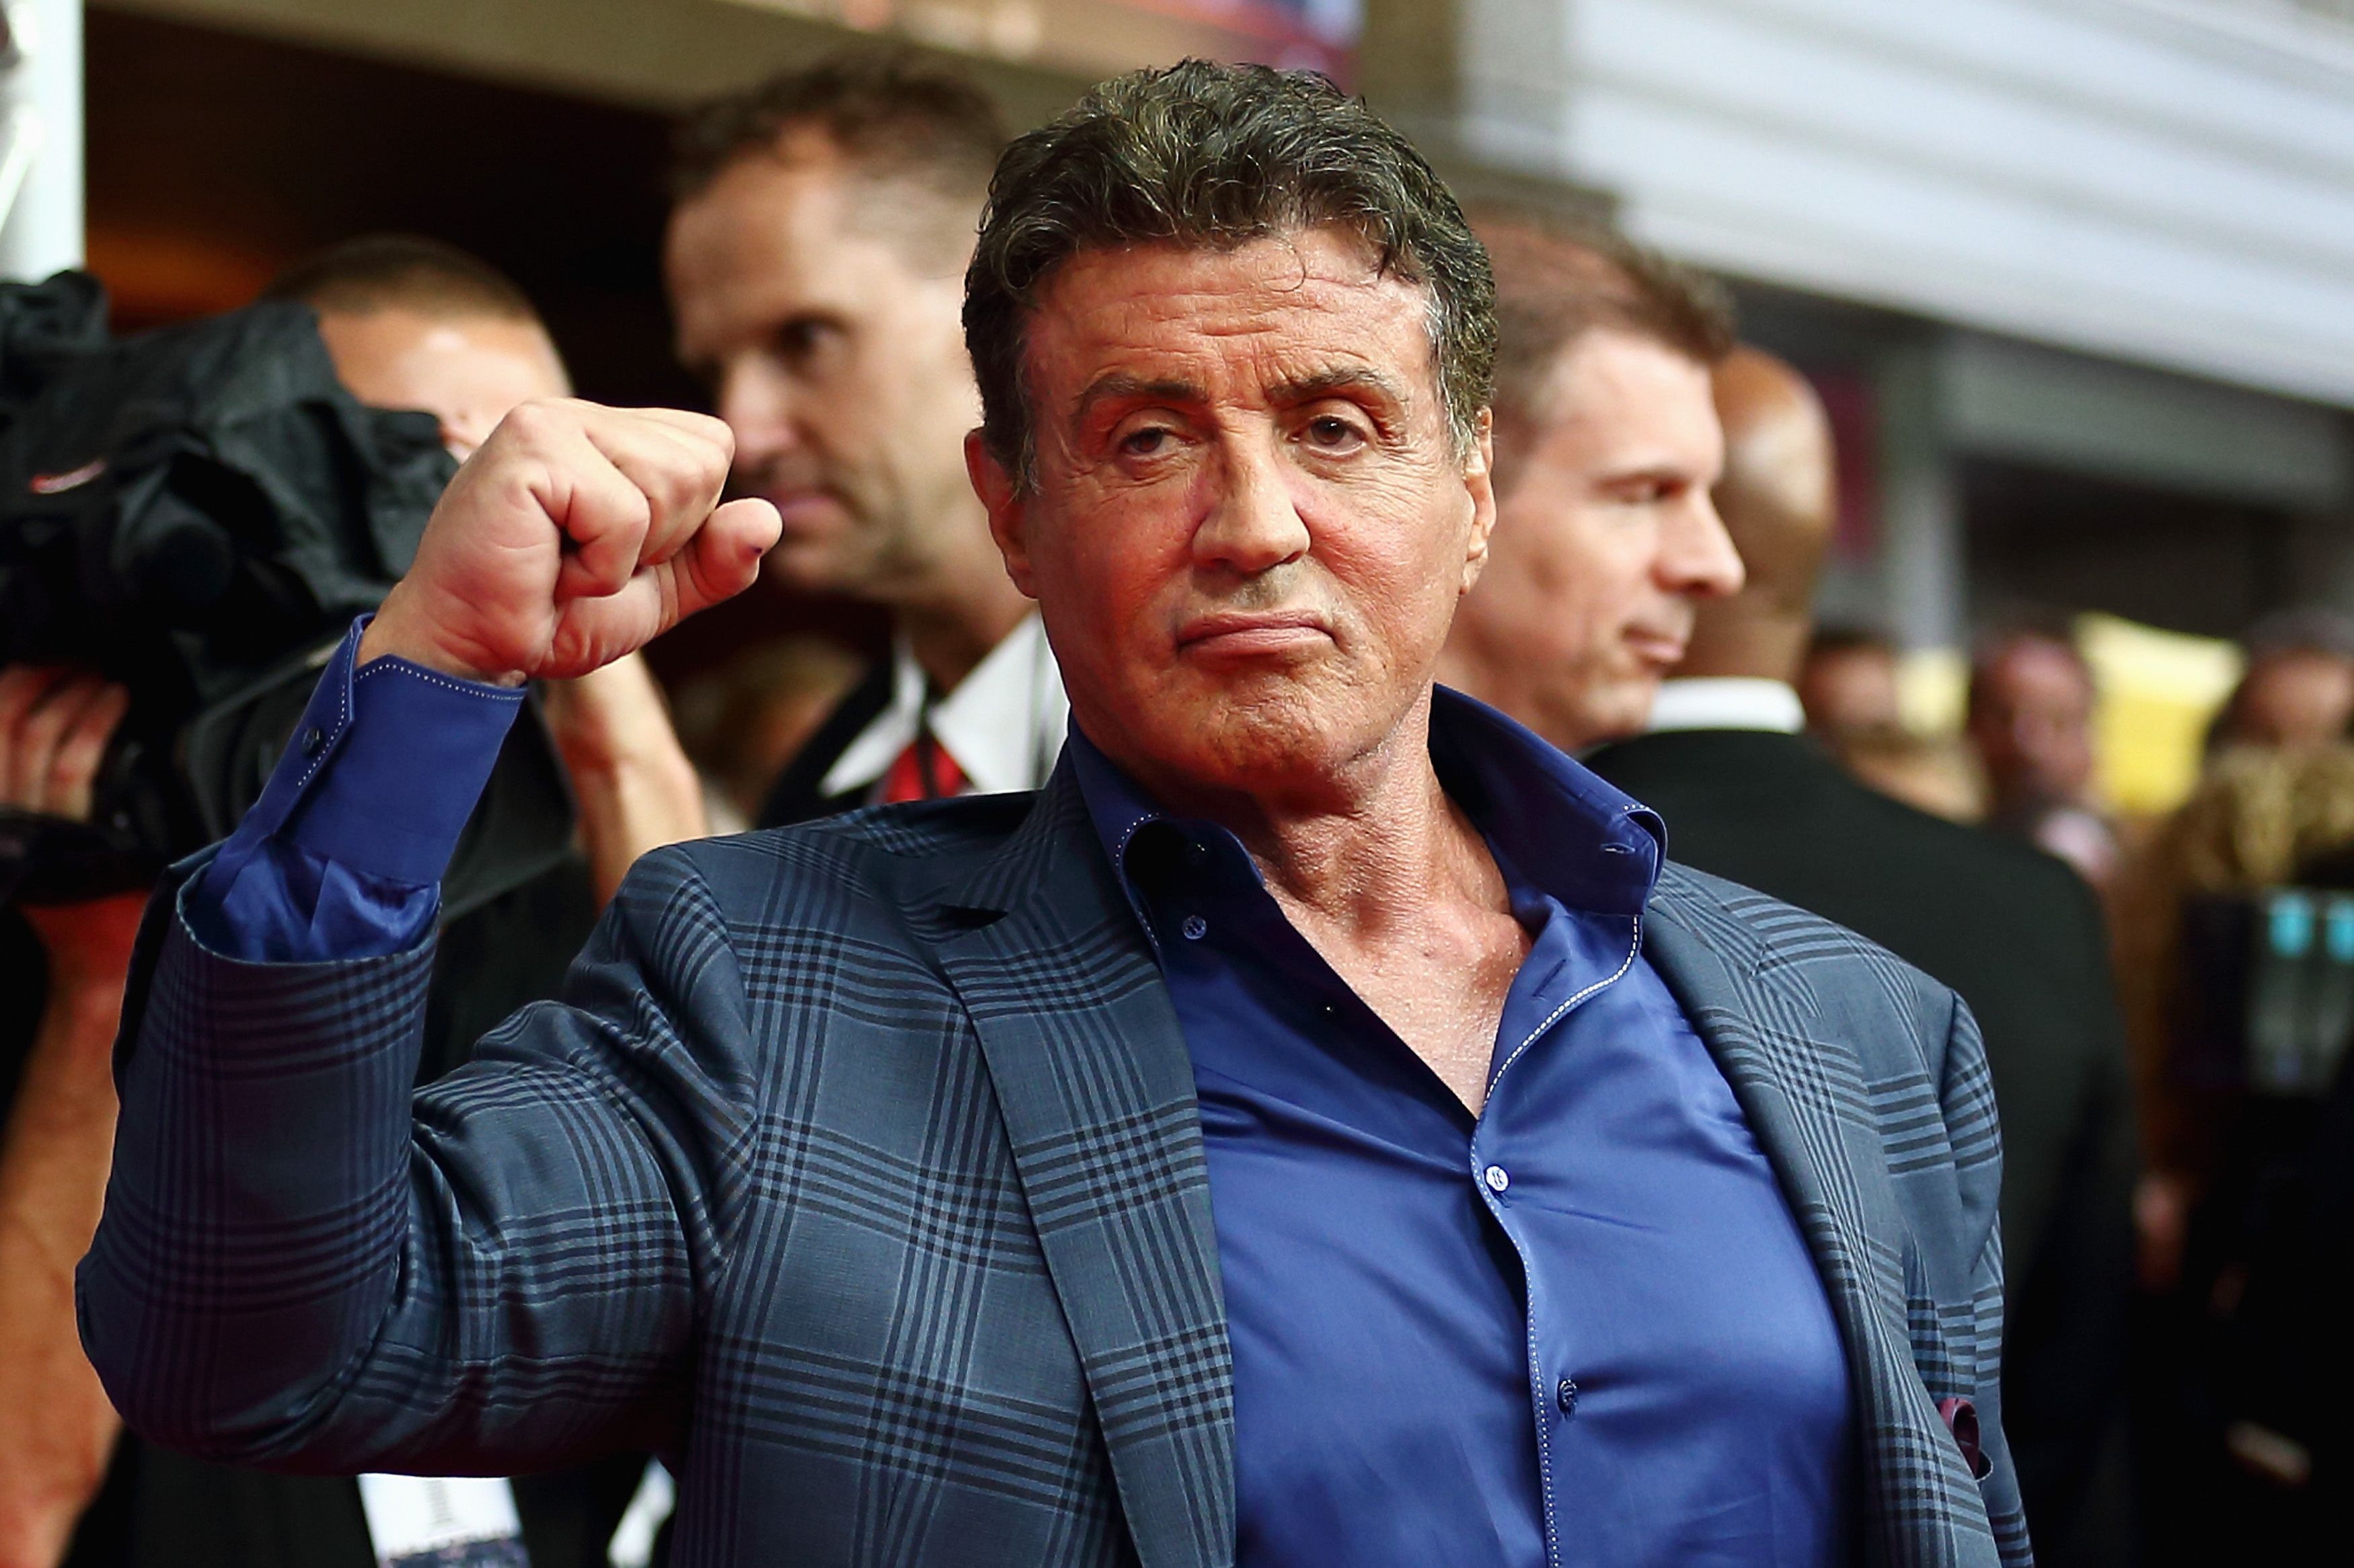 COLOGNE, GERMANY - AUGUST 06: Sylvester Stallone attends the German premiere of the film 'The Expendables 3' at Residenz Kino on August 6, 2014 in Cologne, Germany. (Photo by Andreas Rentz/Getty Images)